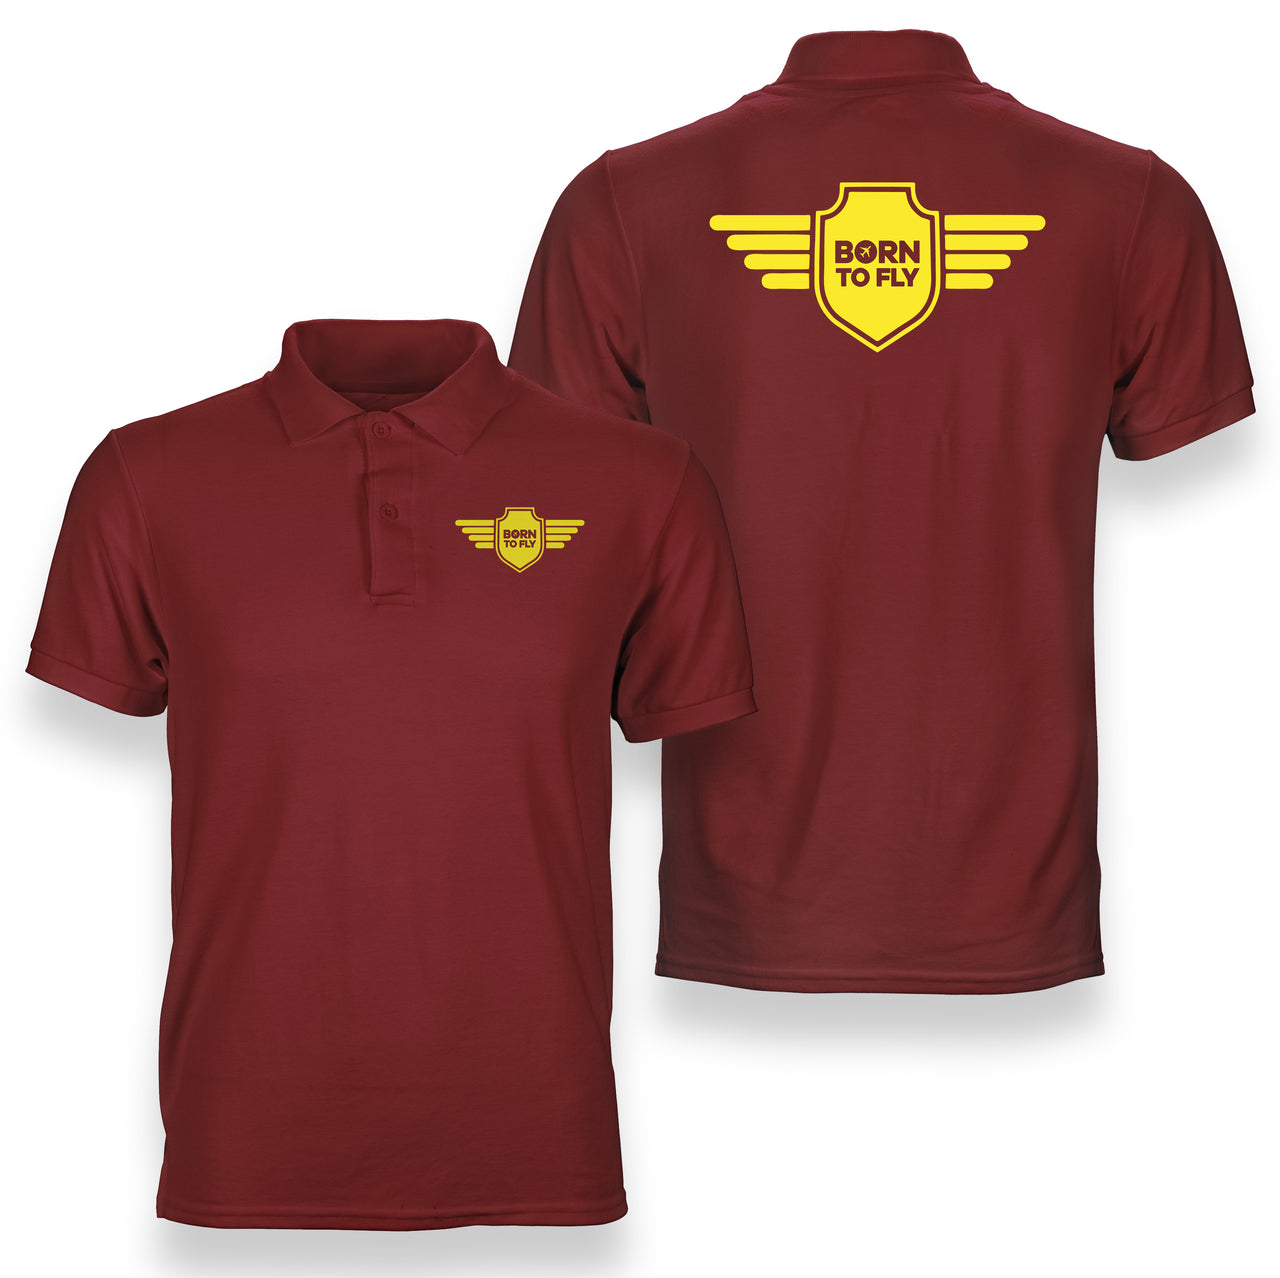 Born To Fly & Badge Designed Double Side Polo T-Shirts